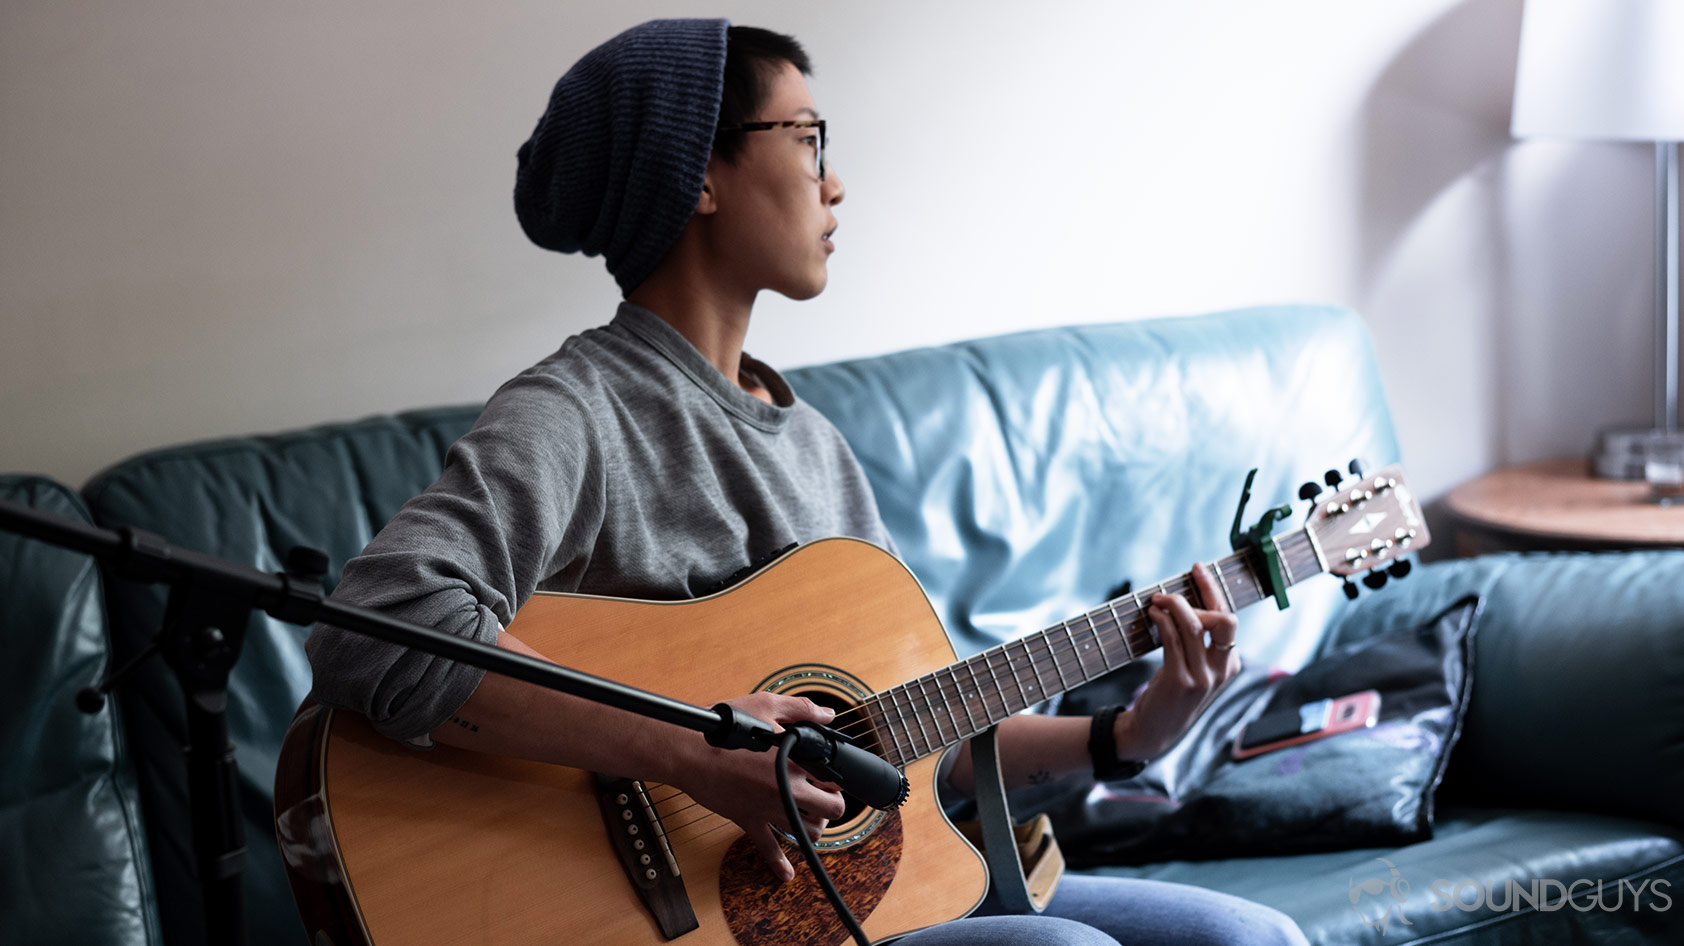 A picture of woman playing guitar and recording it with the Shure SM57 XLR mic.